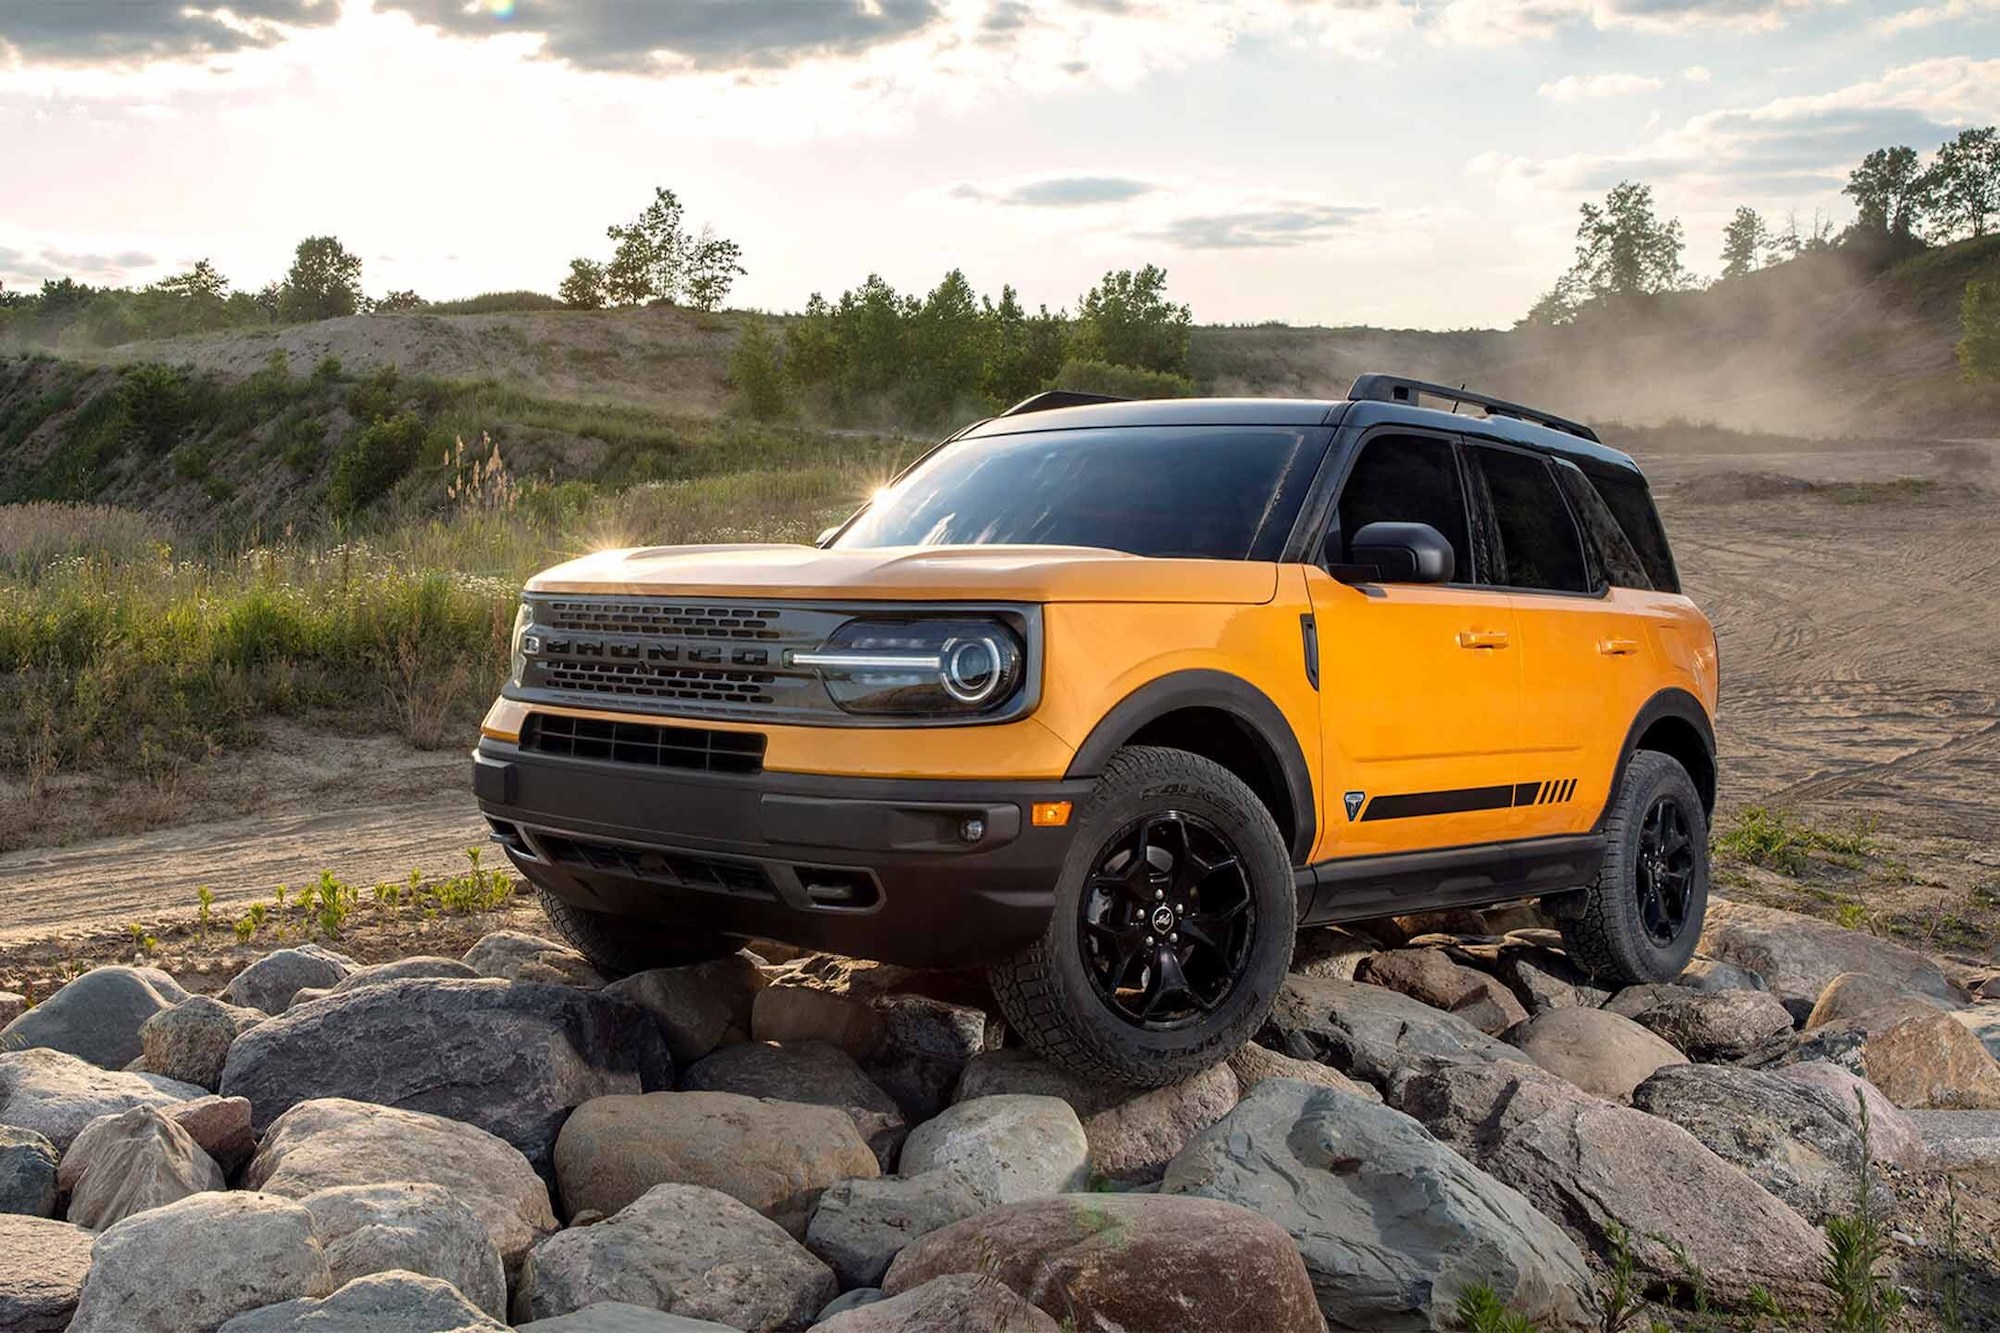 An orange metallic 2021 Ford Bronco Sport compact crossover SUV parked on rocks beside a dirt road